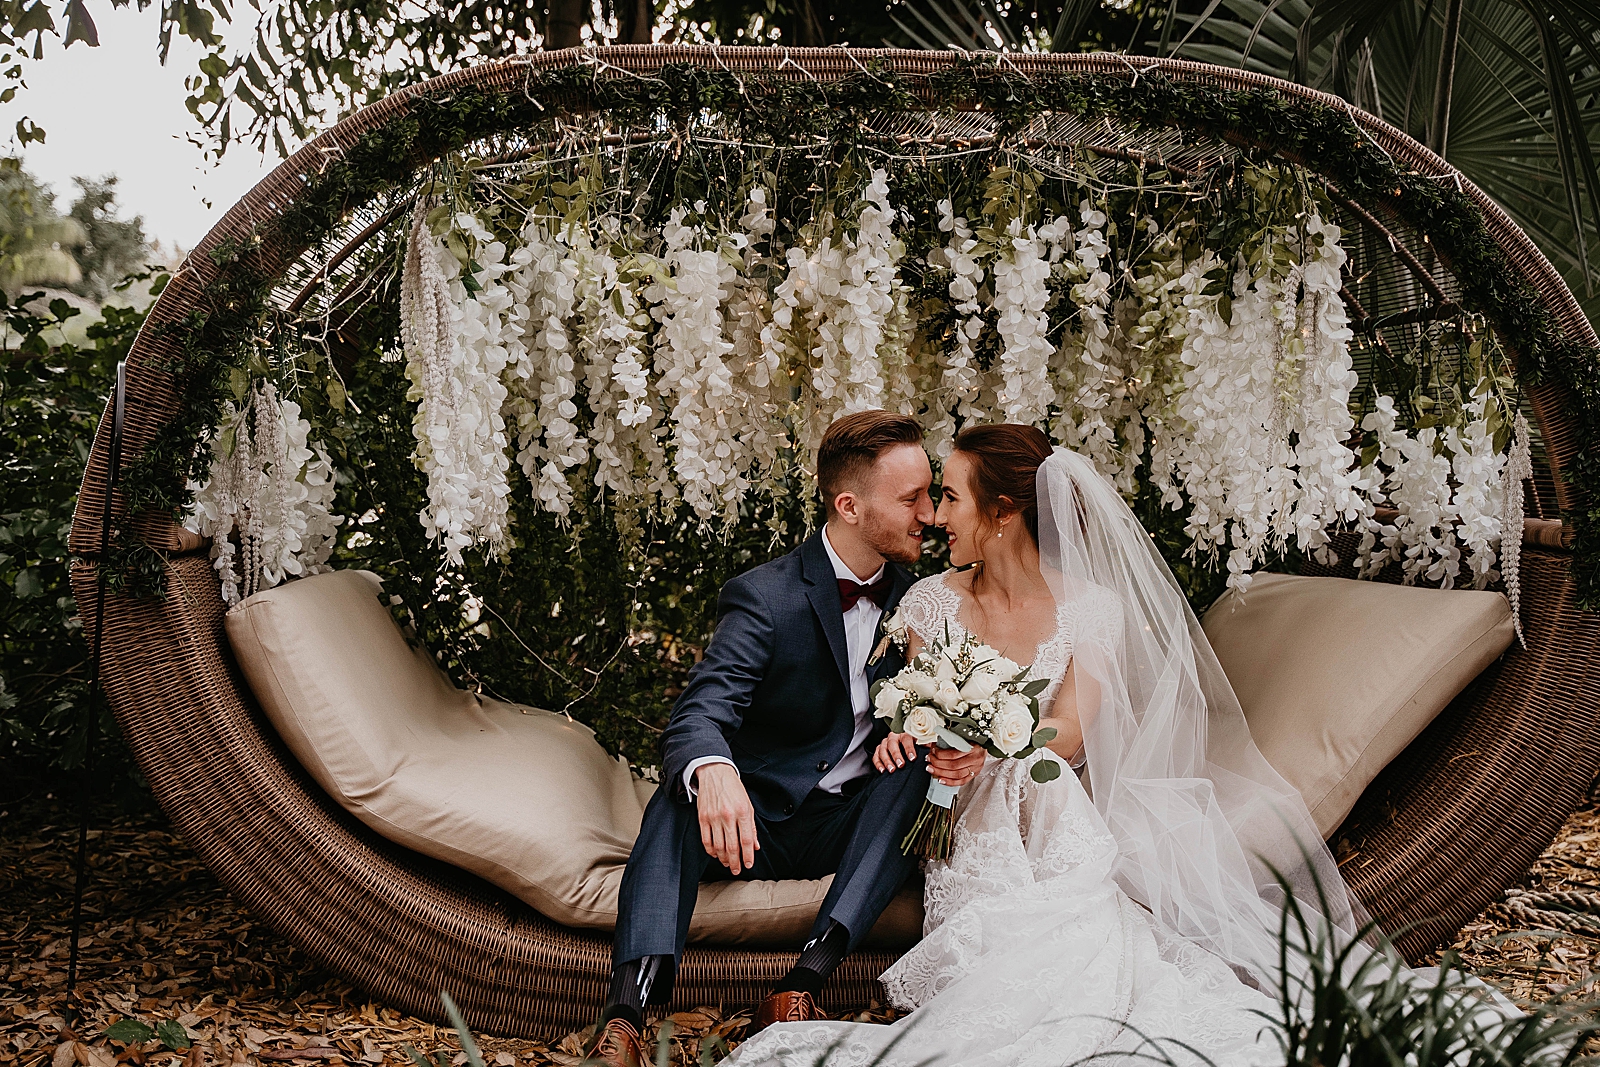 Couple sitting on Garden couch nuzzling noses with white petals hanging Living Sculptures Sanctuary Wedding Photography captured by South Florida Wedding Photographer Krystal Capone Photography 